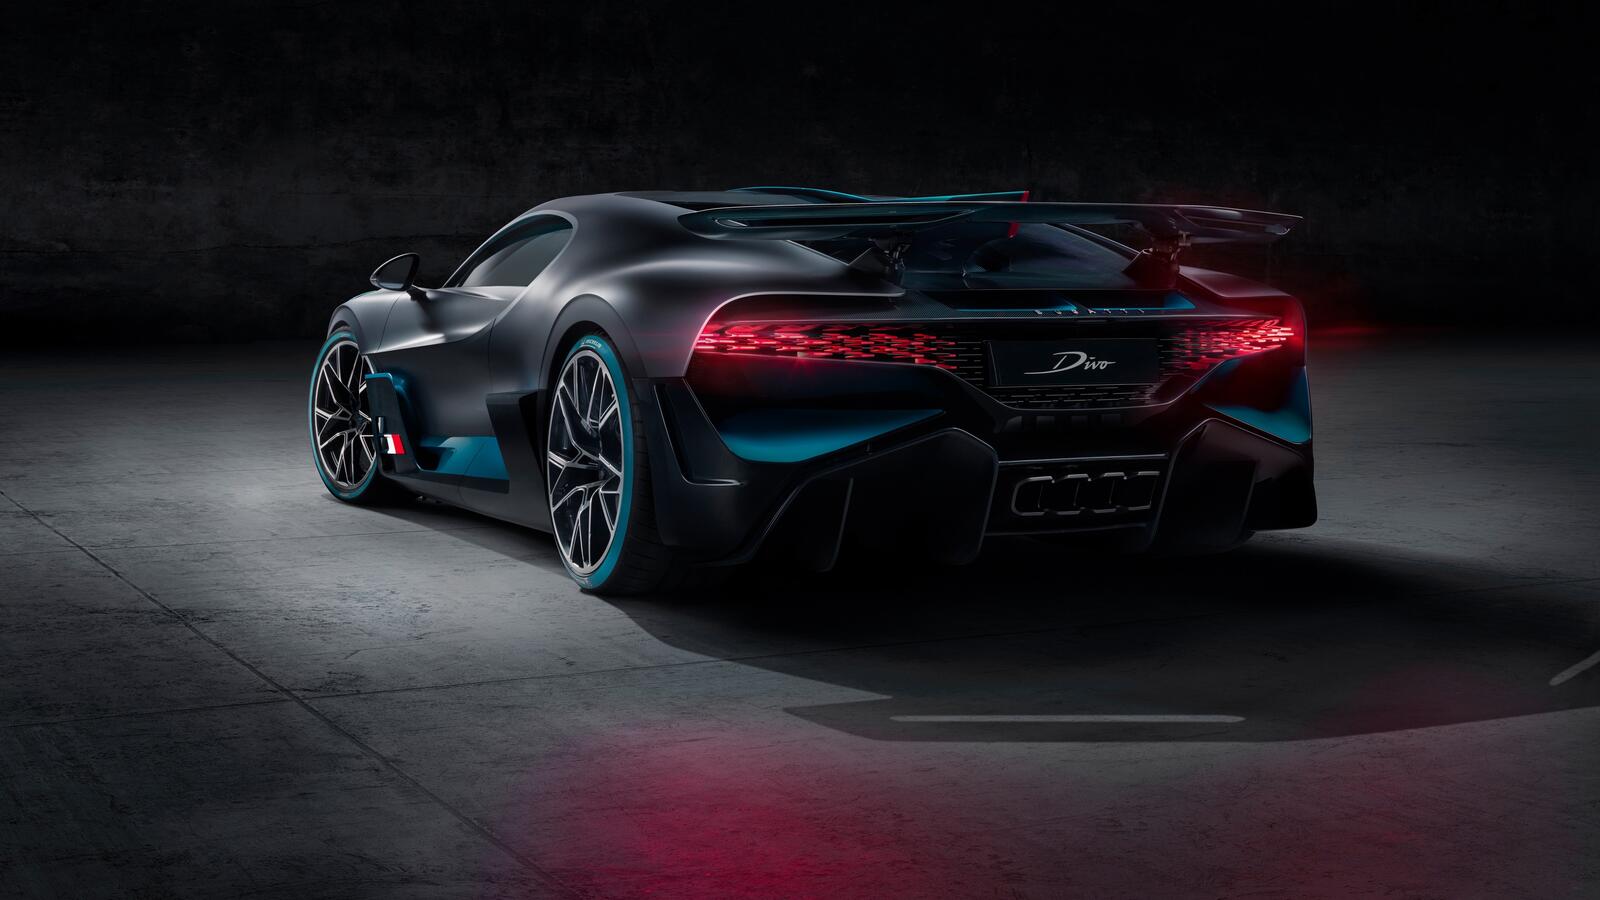 Wallpapers supercars view from behind bugatti divo 2019 on the desktop